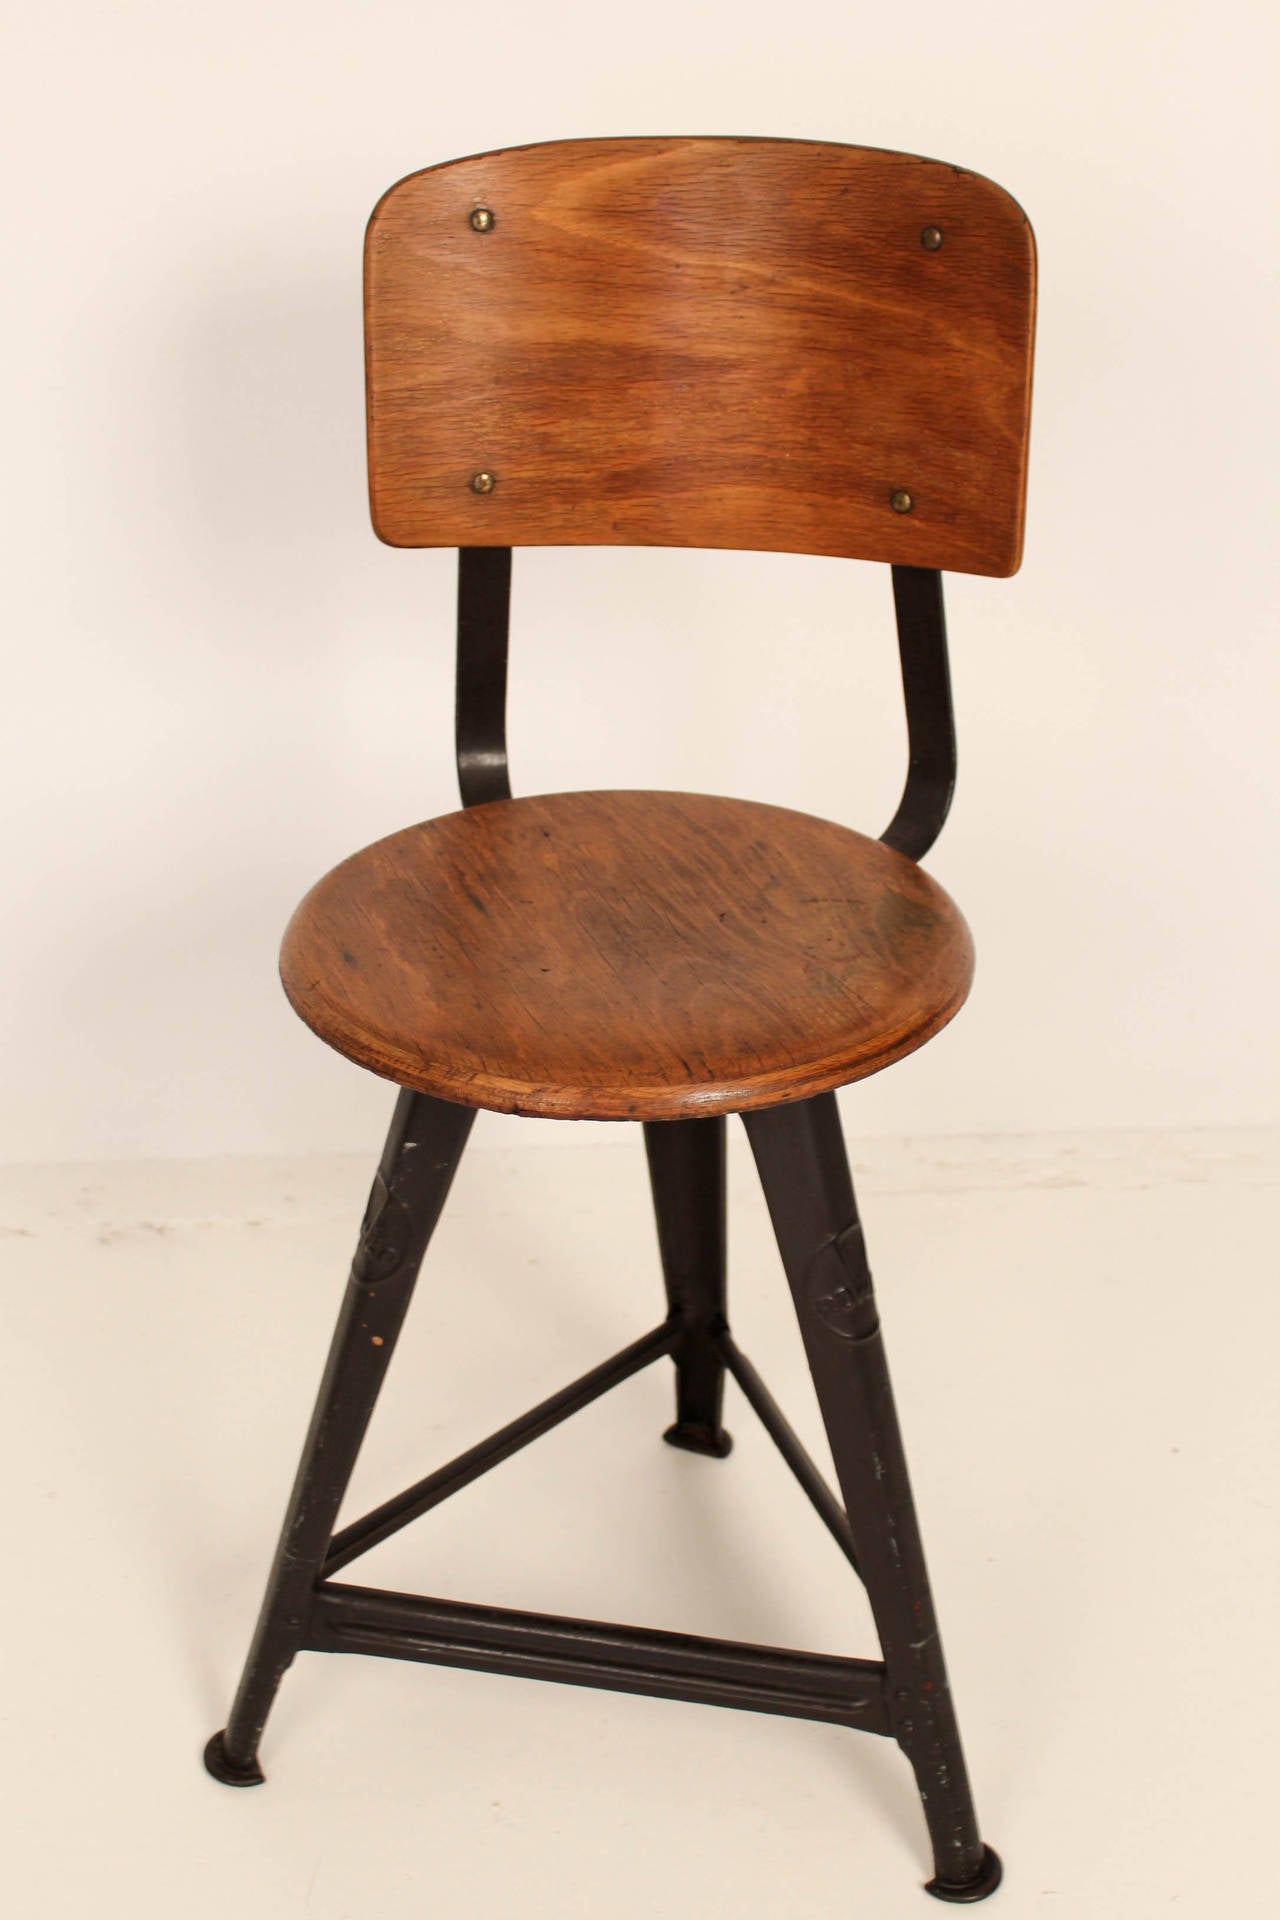 Rare Rowac Bauhaus stool with original backrest by Robert Wagner Chemnitz.
Stool used by workers in the Bauhaus in the 1920s-30s.
Folded and pressed steel with original beech seat and backrest.